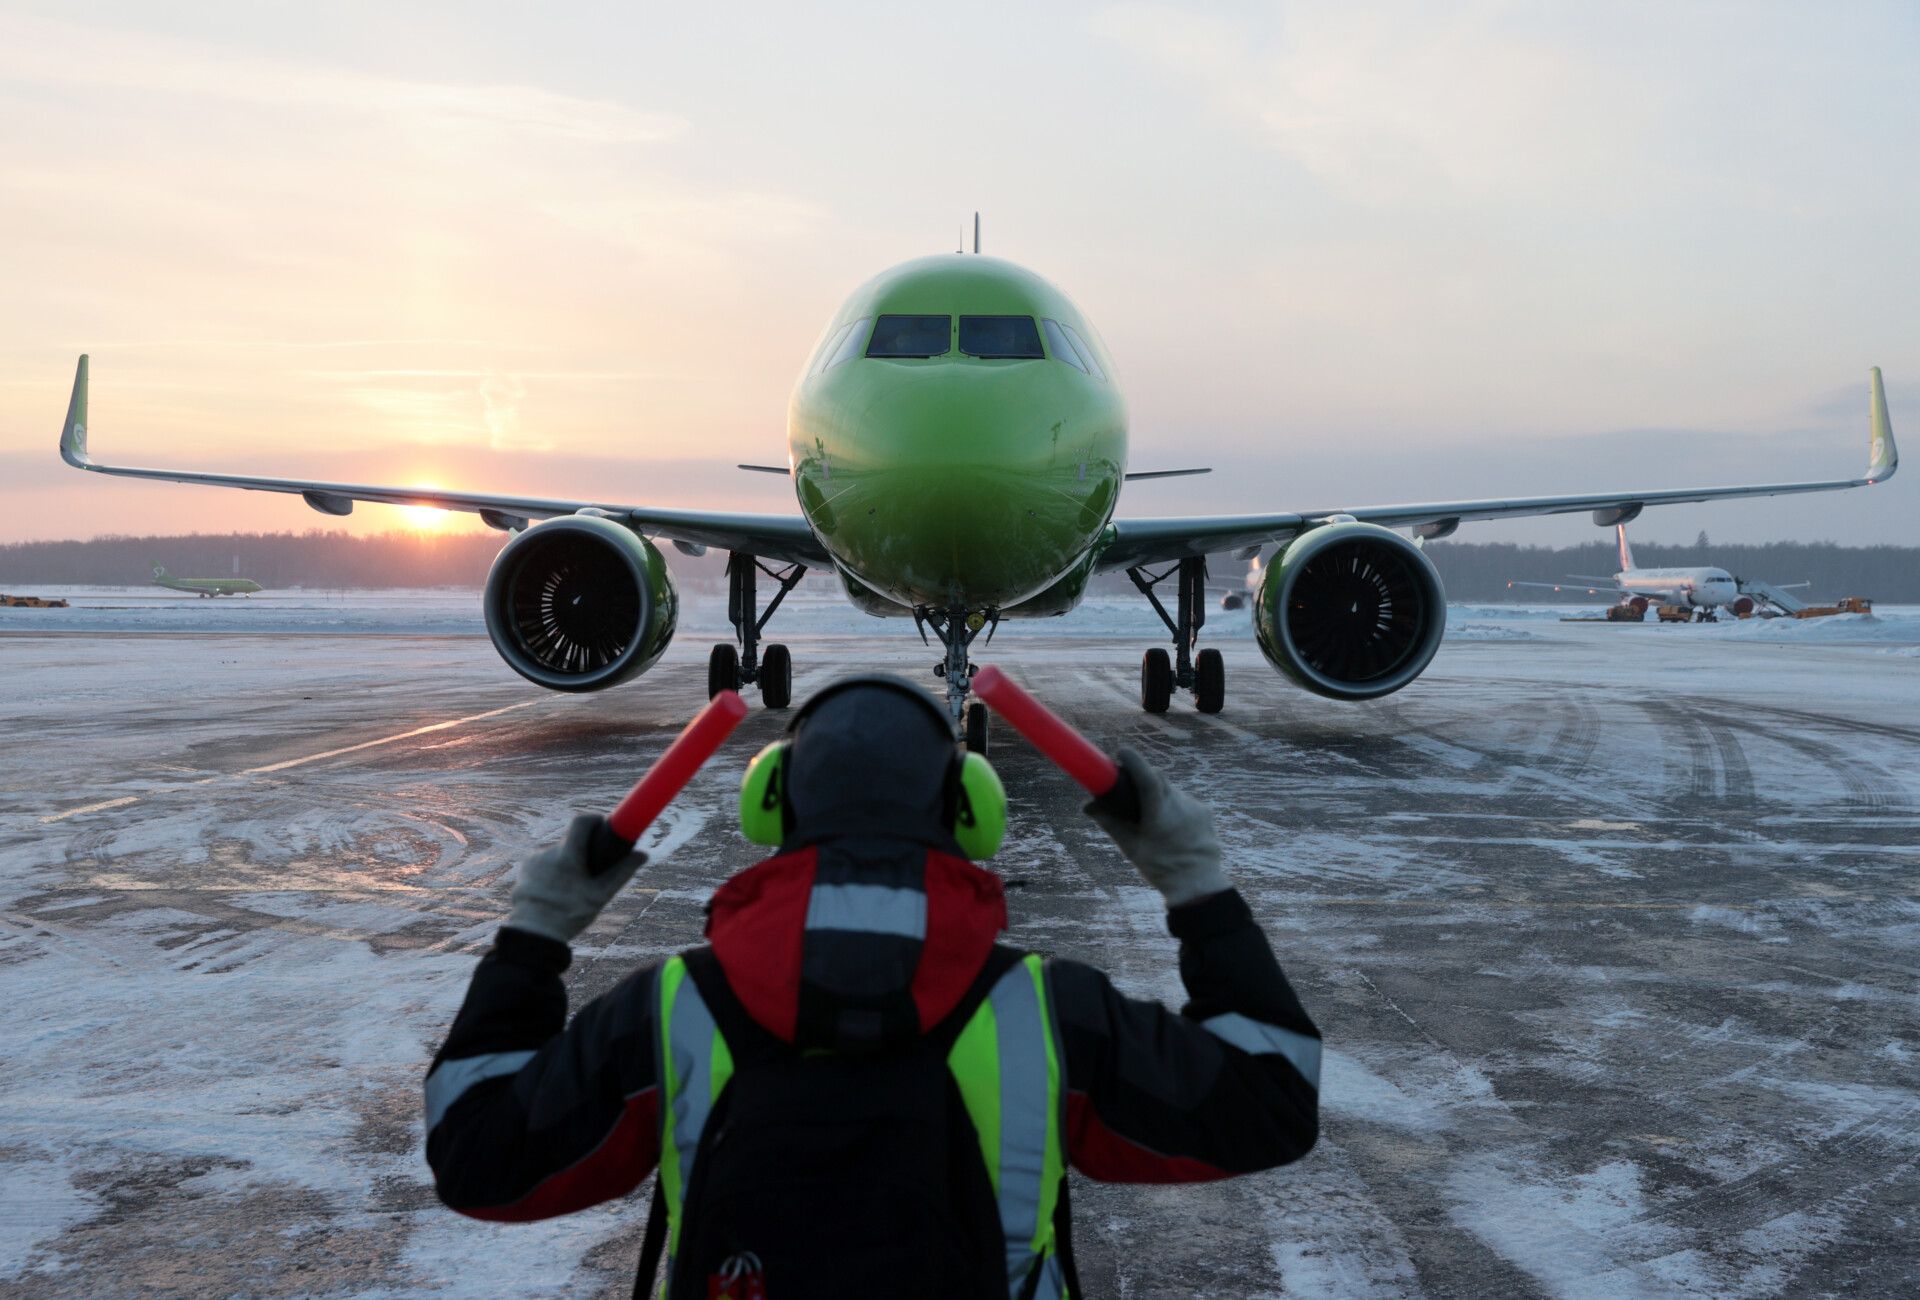 S7 Airlines aircraft performs first flight in Russia on biofuel